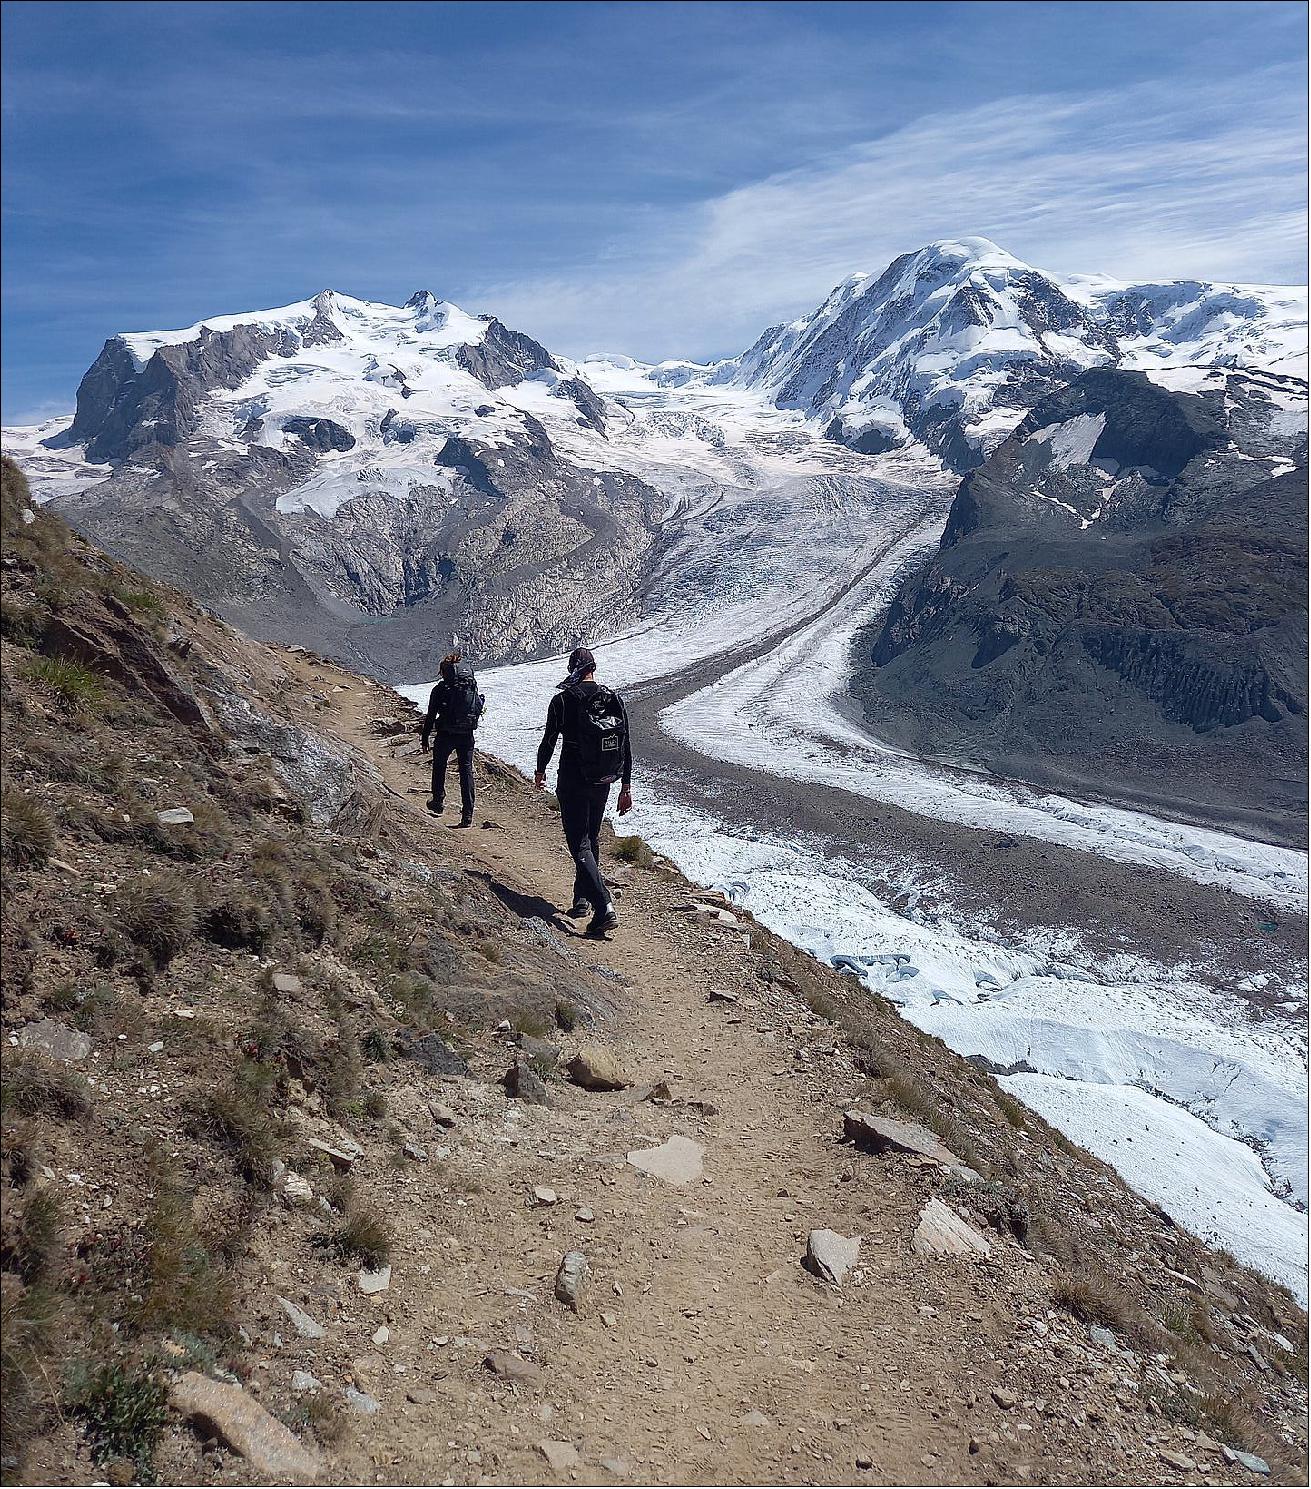 Figure 1: In August 2021 ESA astronaut, Luca Parmitano, and the head of the ESA Climate Office, Susanne Mecklenburg, joined a science expedition taking place at one of the biggest ice masses in the Alps: the Gorner Glacier (image credit: ESA)